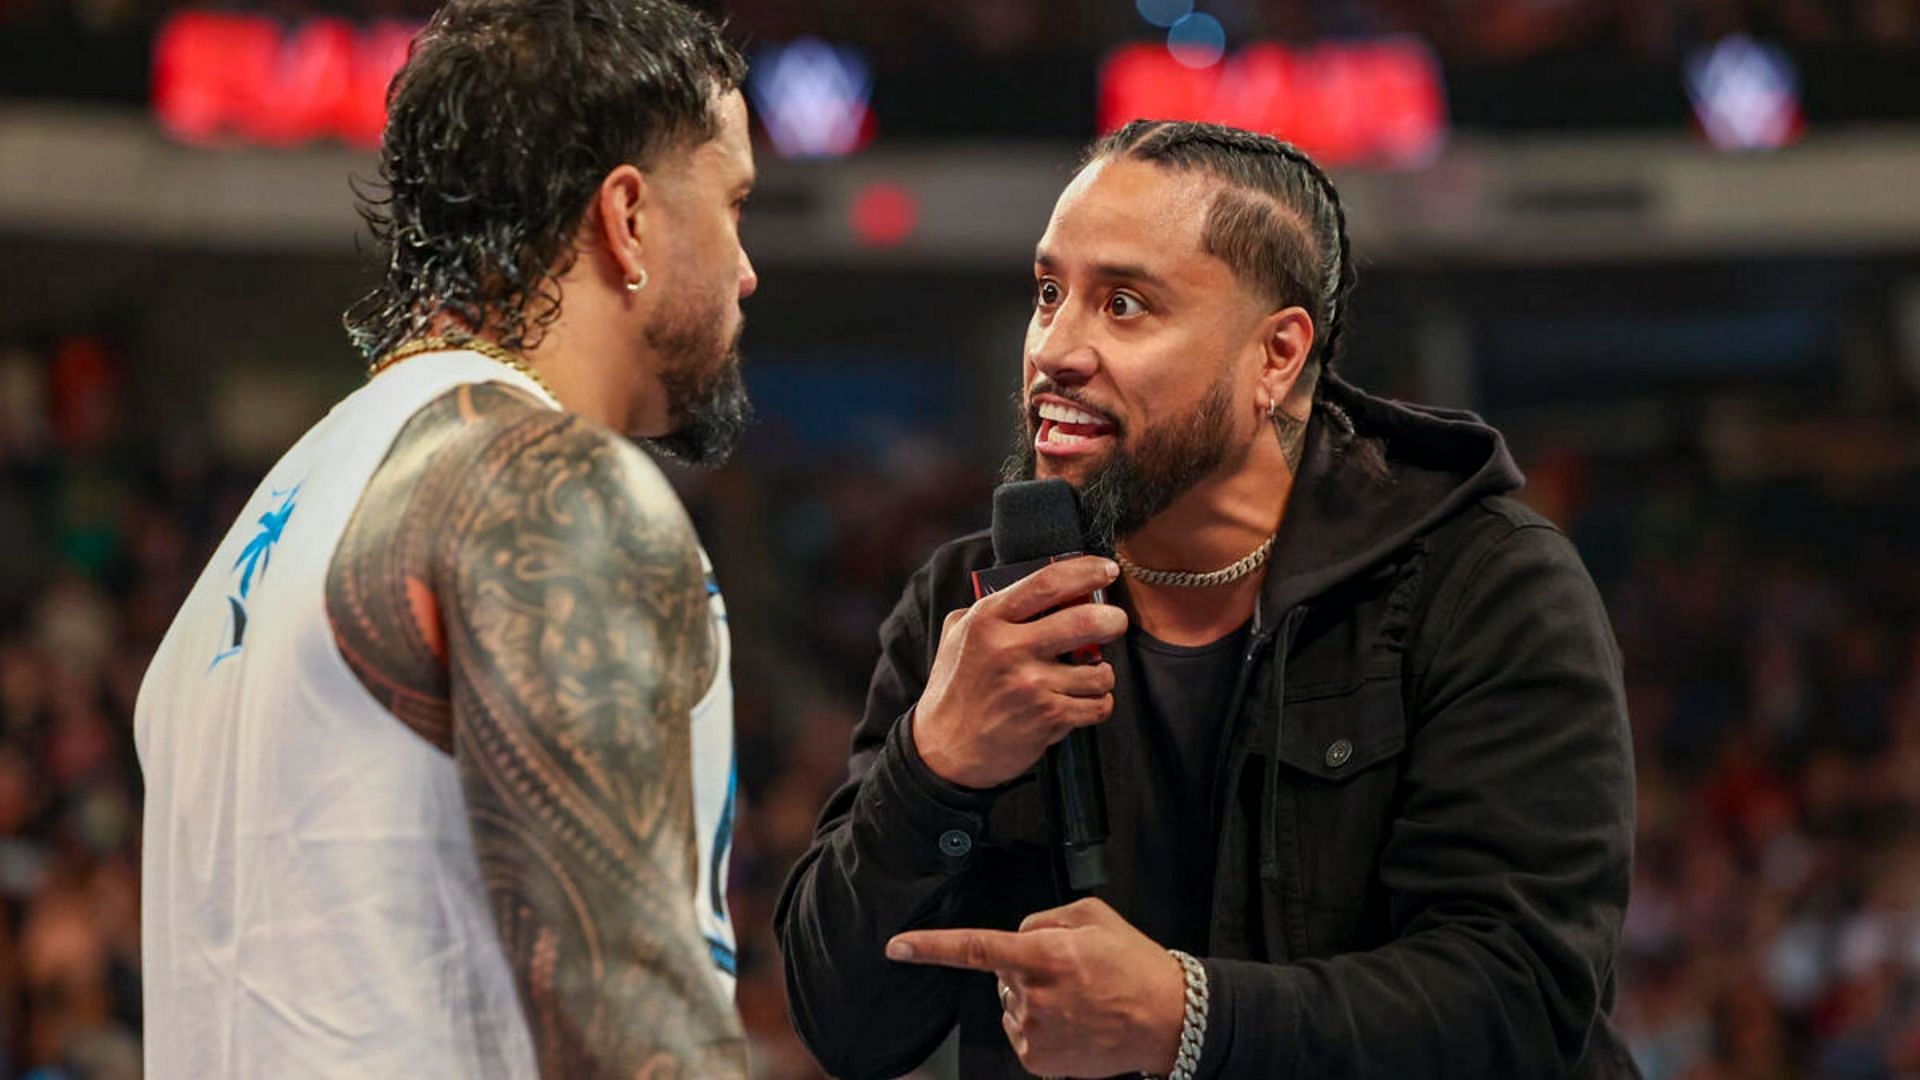 Jimmy and Jey Uso will square off at WWE WrestleMania XL